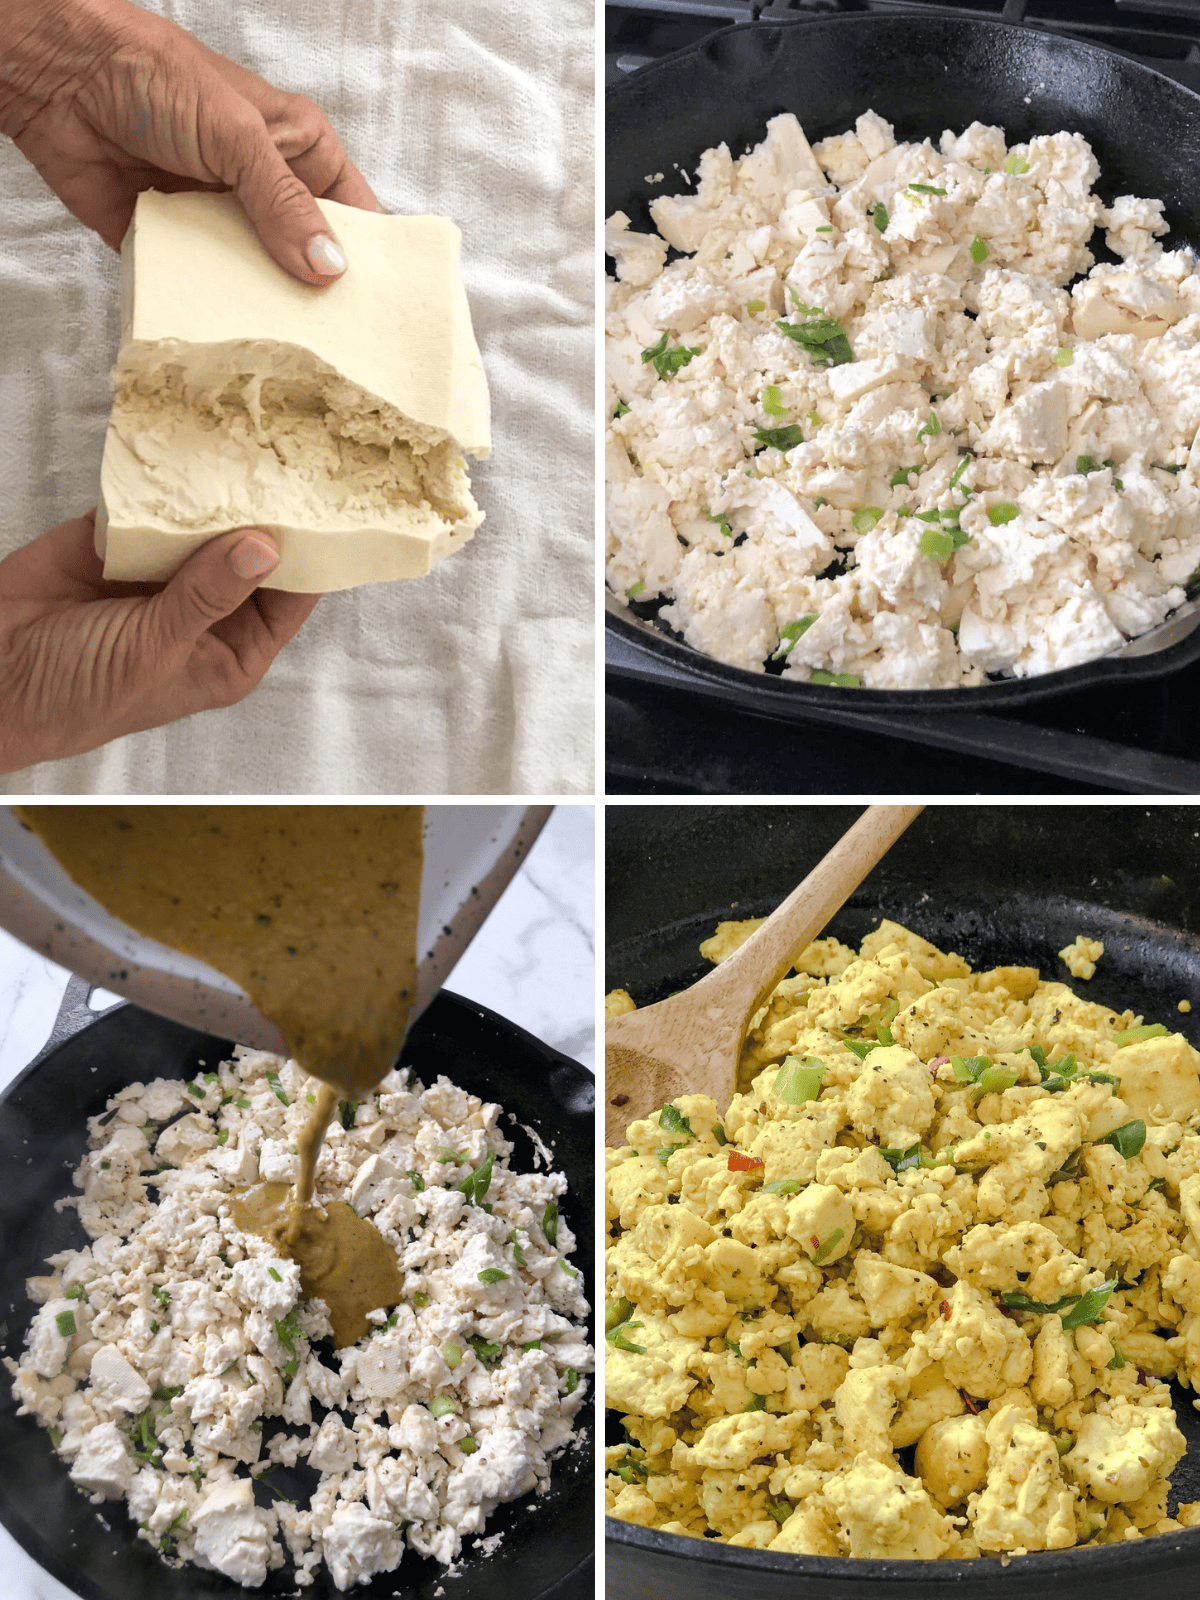 Steps by step photos for making tofu scramble from scratch.